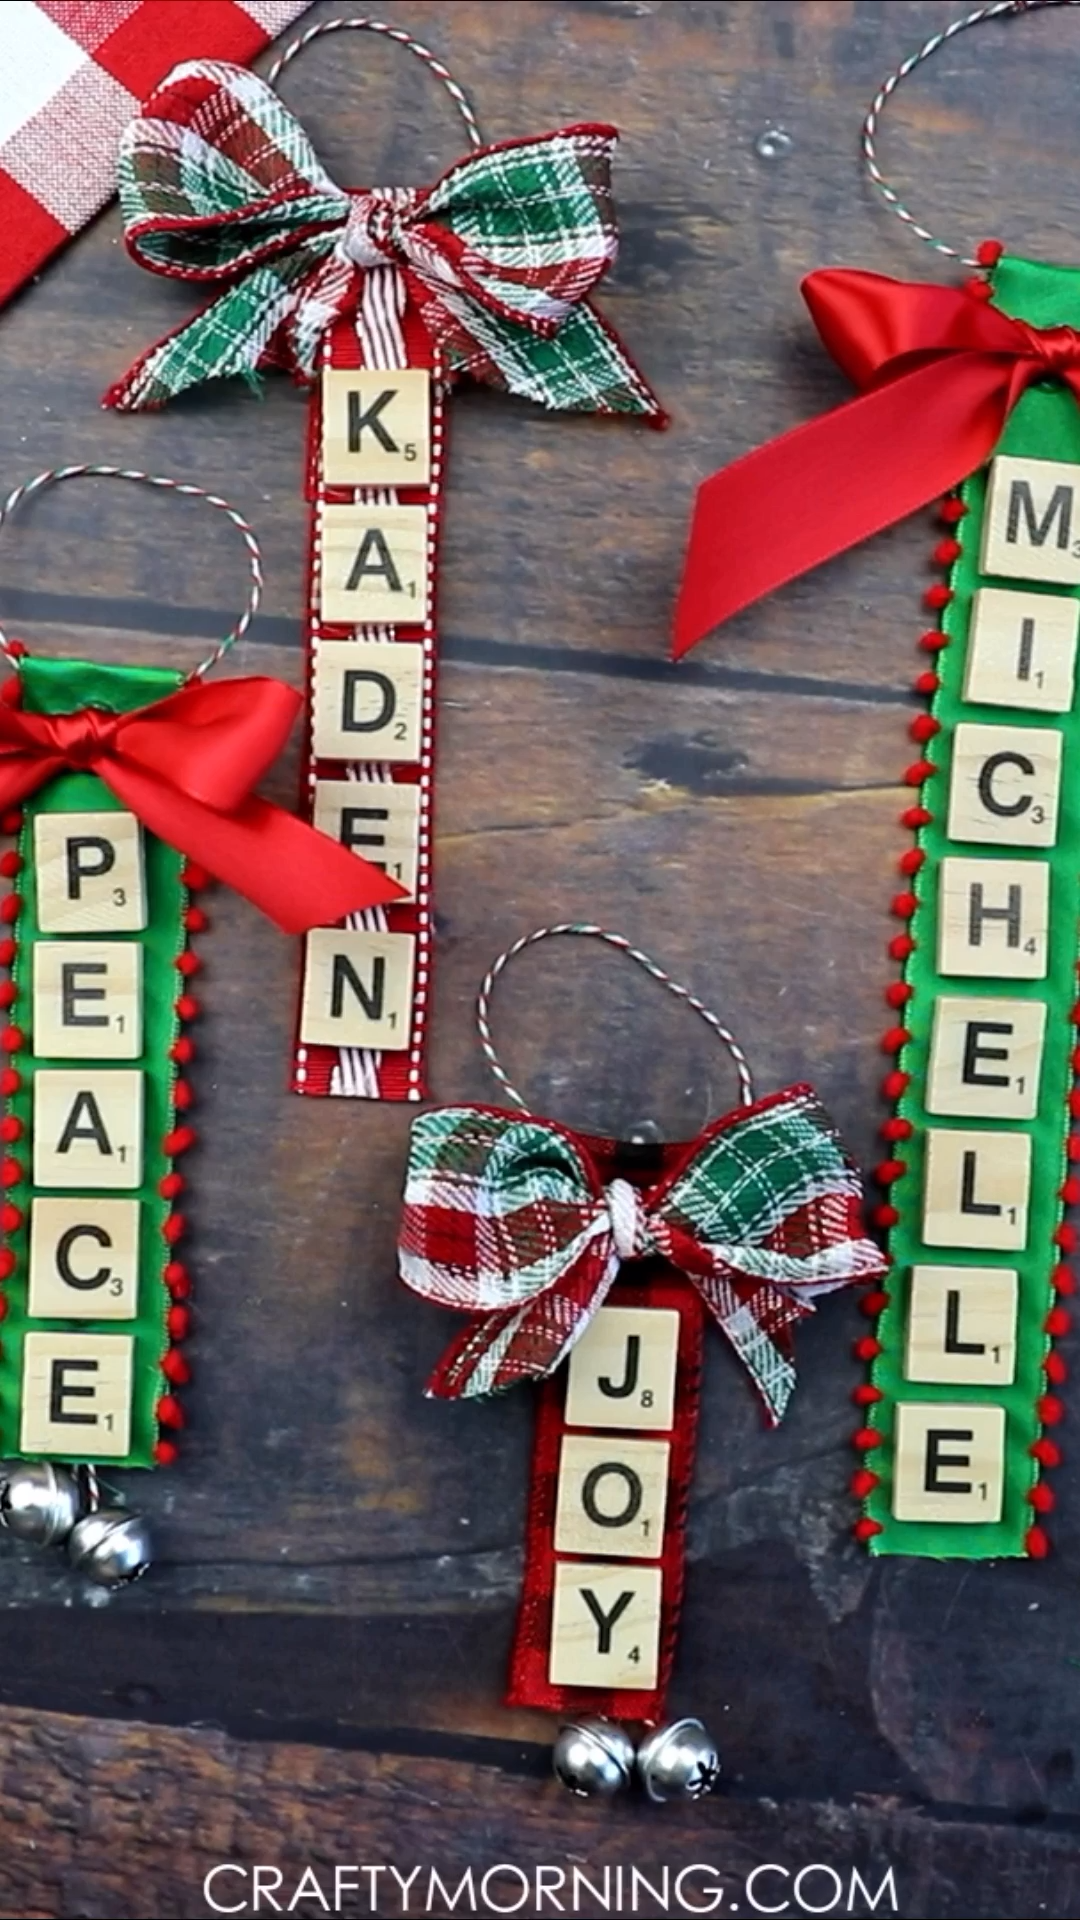 Personalized Scrabble Letter Ornaments -   diy Ideas gifts